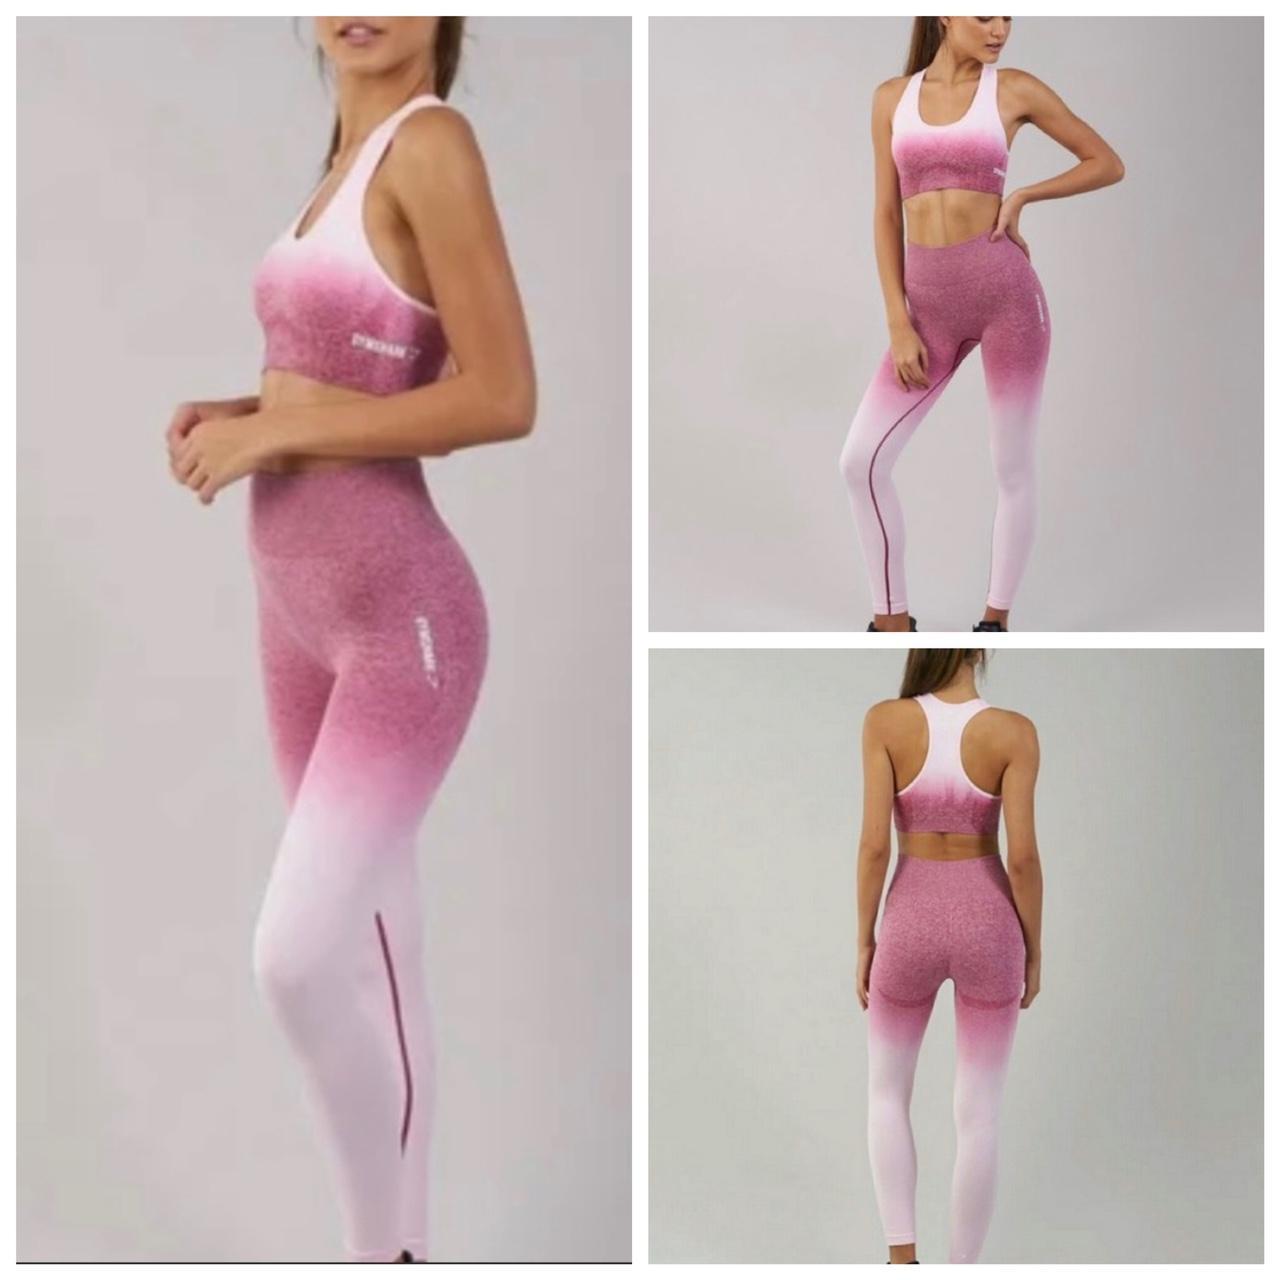 Gymshark Pink Legacy Leggings NWOT - $38 New With Tags - From Emma